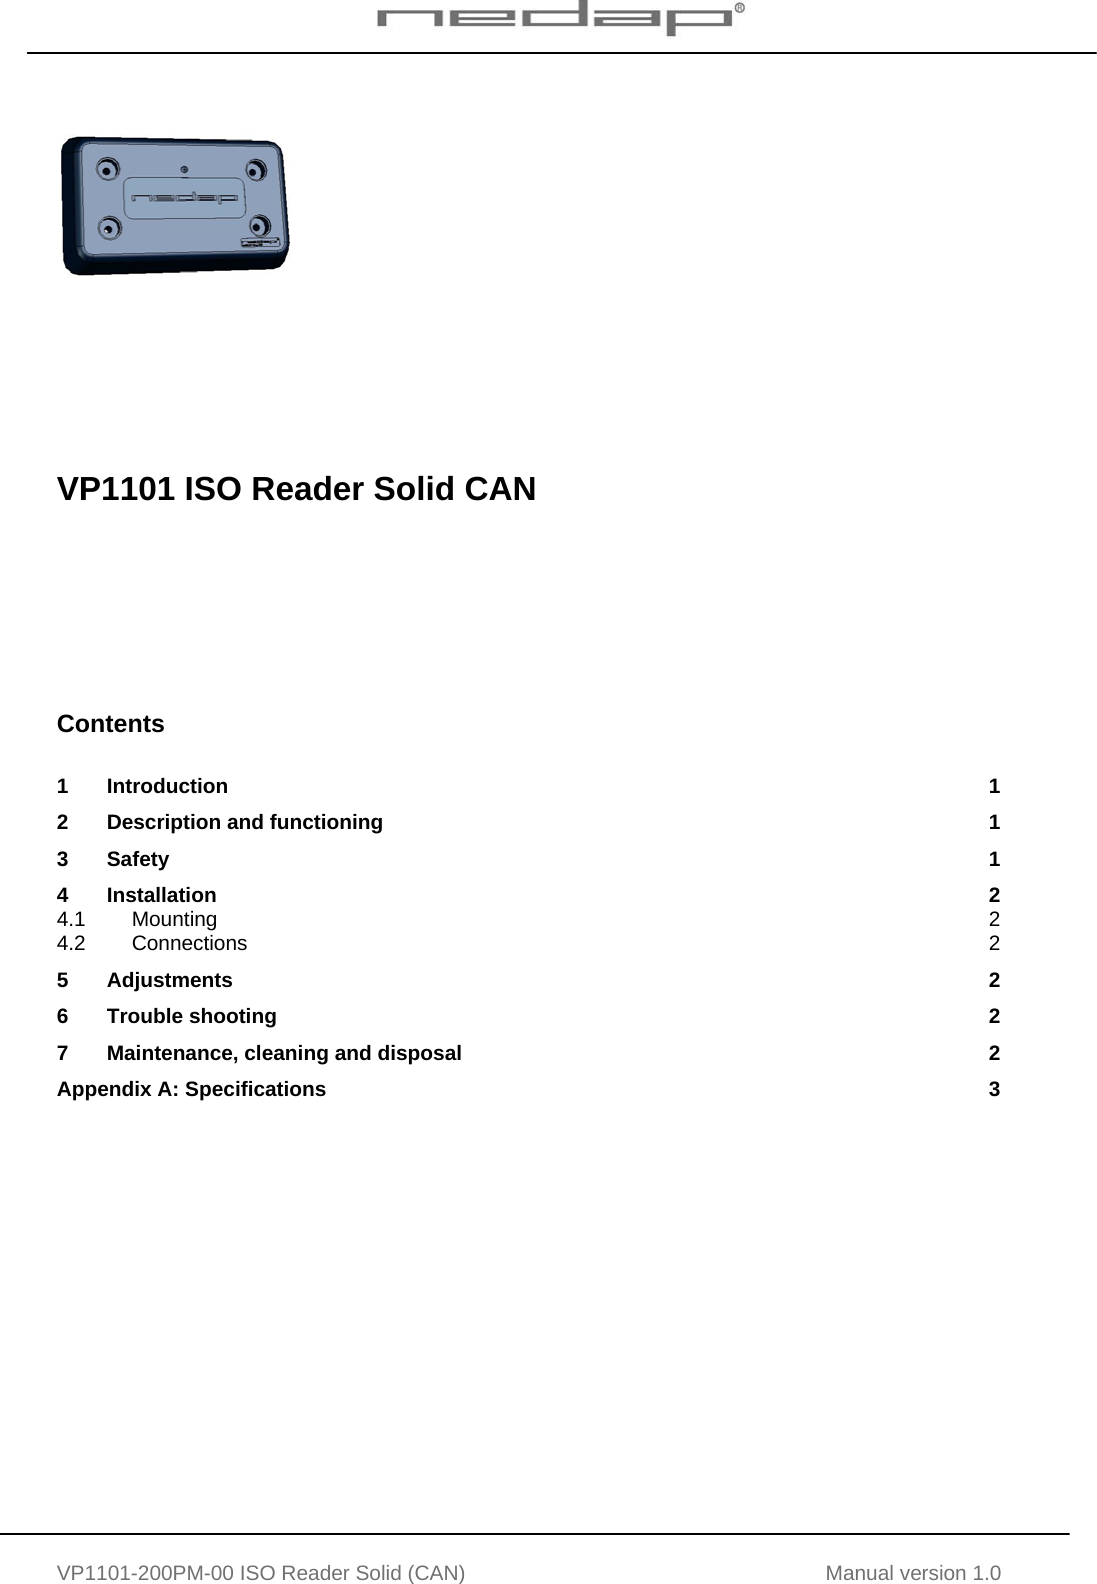   VP1101-200PM-00 ISO Reader Solid (CAN) Manual version 1.0           VP1101 ISO Reader Solid CAN        Contents  1 Introduction  1 2 Description and functioning  1 3 Safety  1 4 Installation  2 4.1 Mounting  2 4.2 Connections  2 5 Adjustments  2 6 Trouble shooting  2 7 Maintenance, cleaning and disposal  2 Appendix A: Specifications  3     